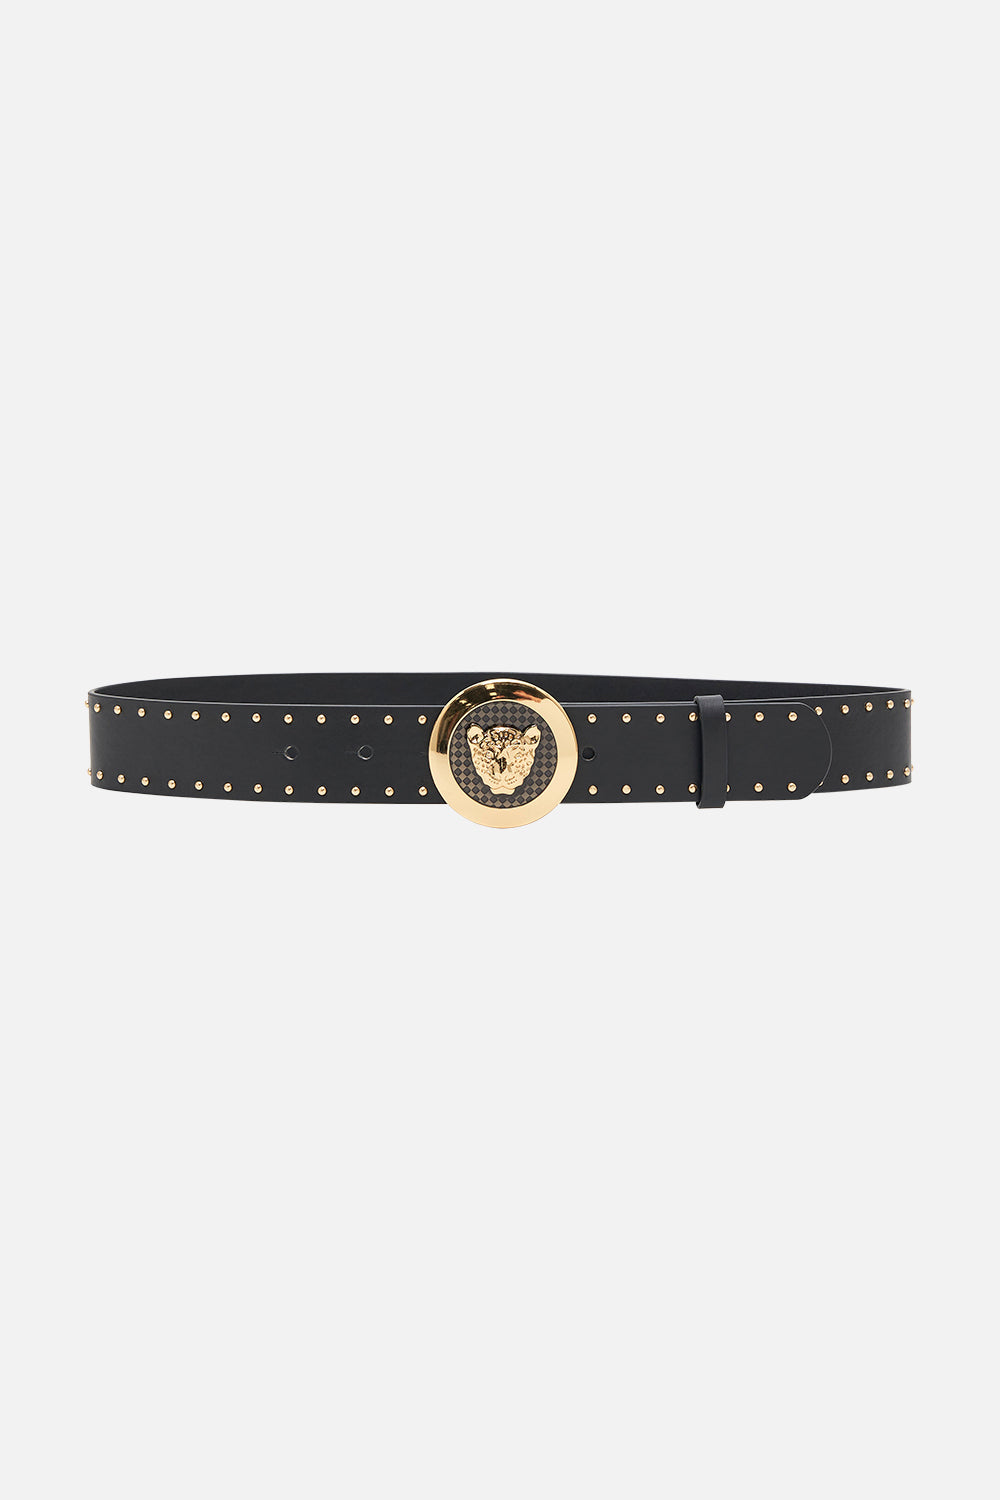 Product view of CAMILLA black leather belt 